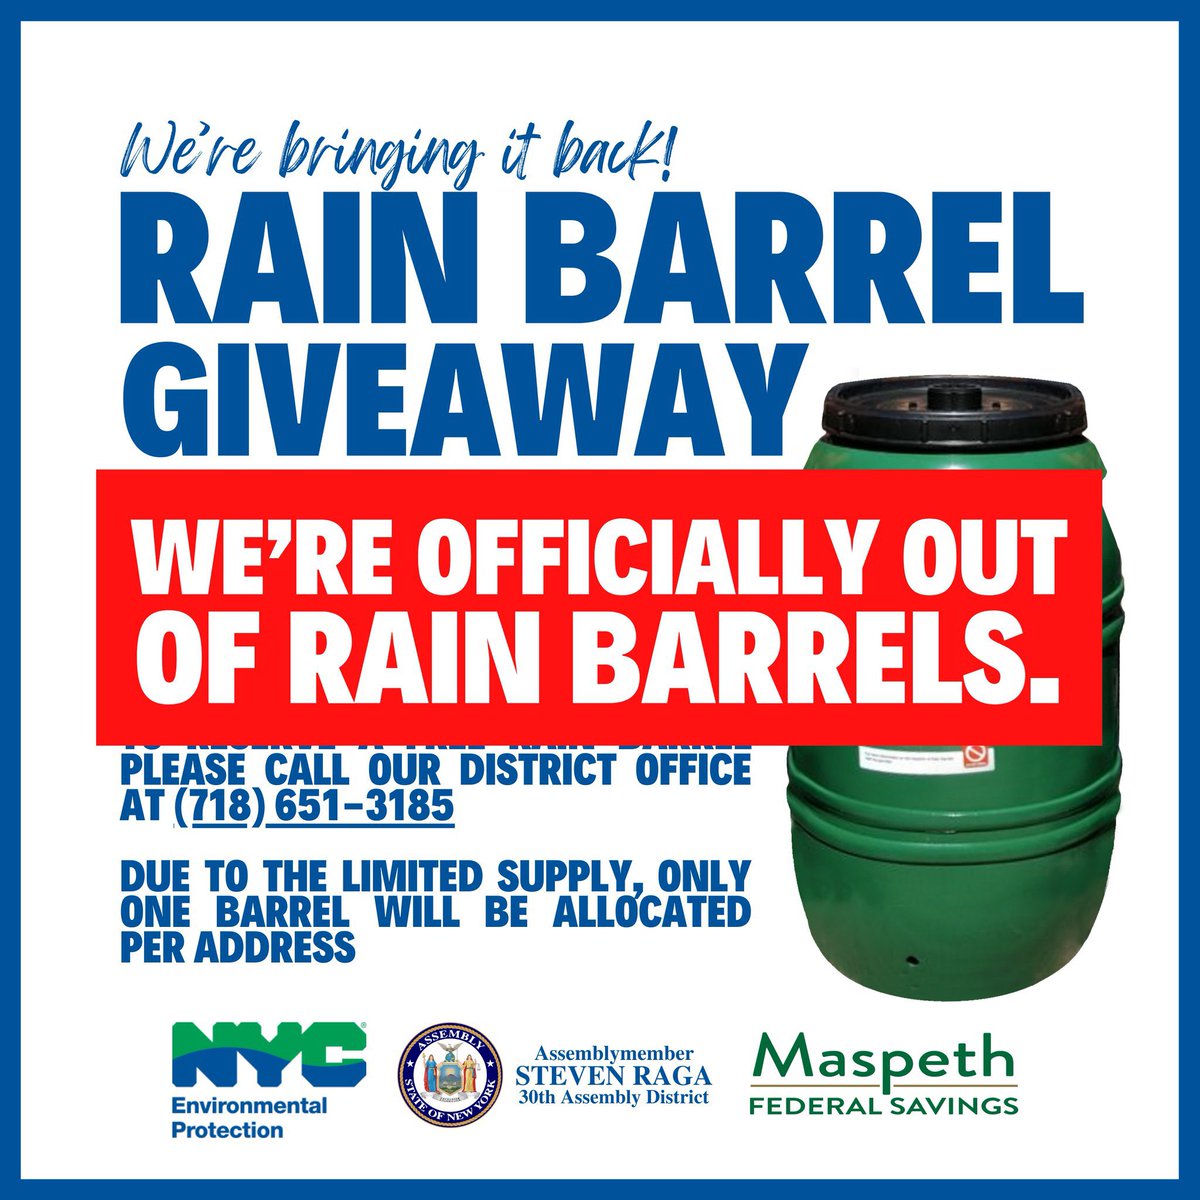 EVENT UPDATE: We're officially OUT of rain barrels for our event on Saturday, June 15th. However, if you're still interested, please call our office to be added to our waitlist for future events and opportunities. Thank you for understanding!